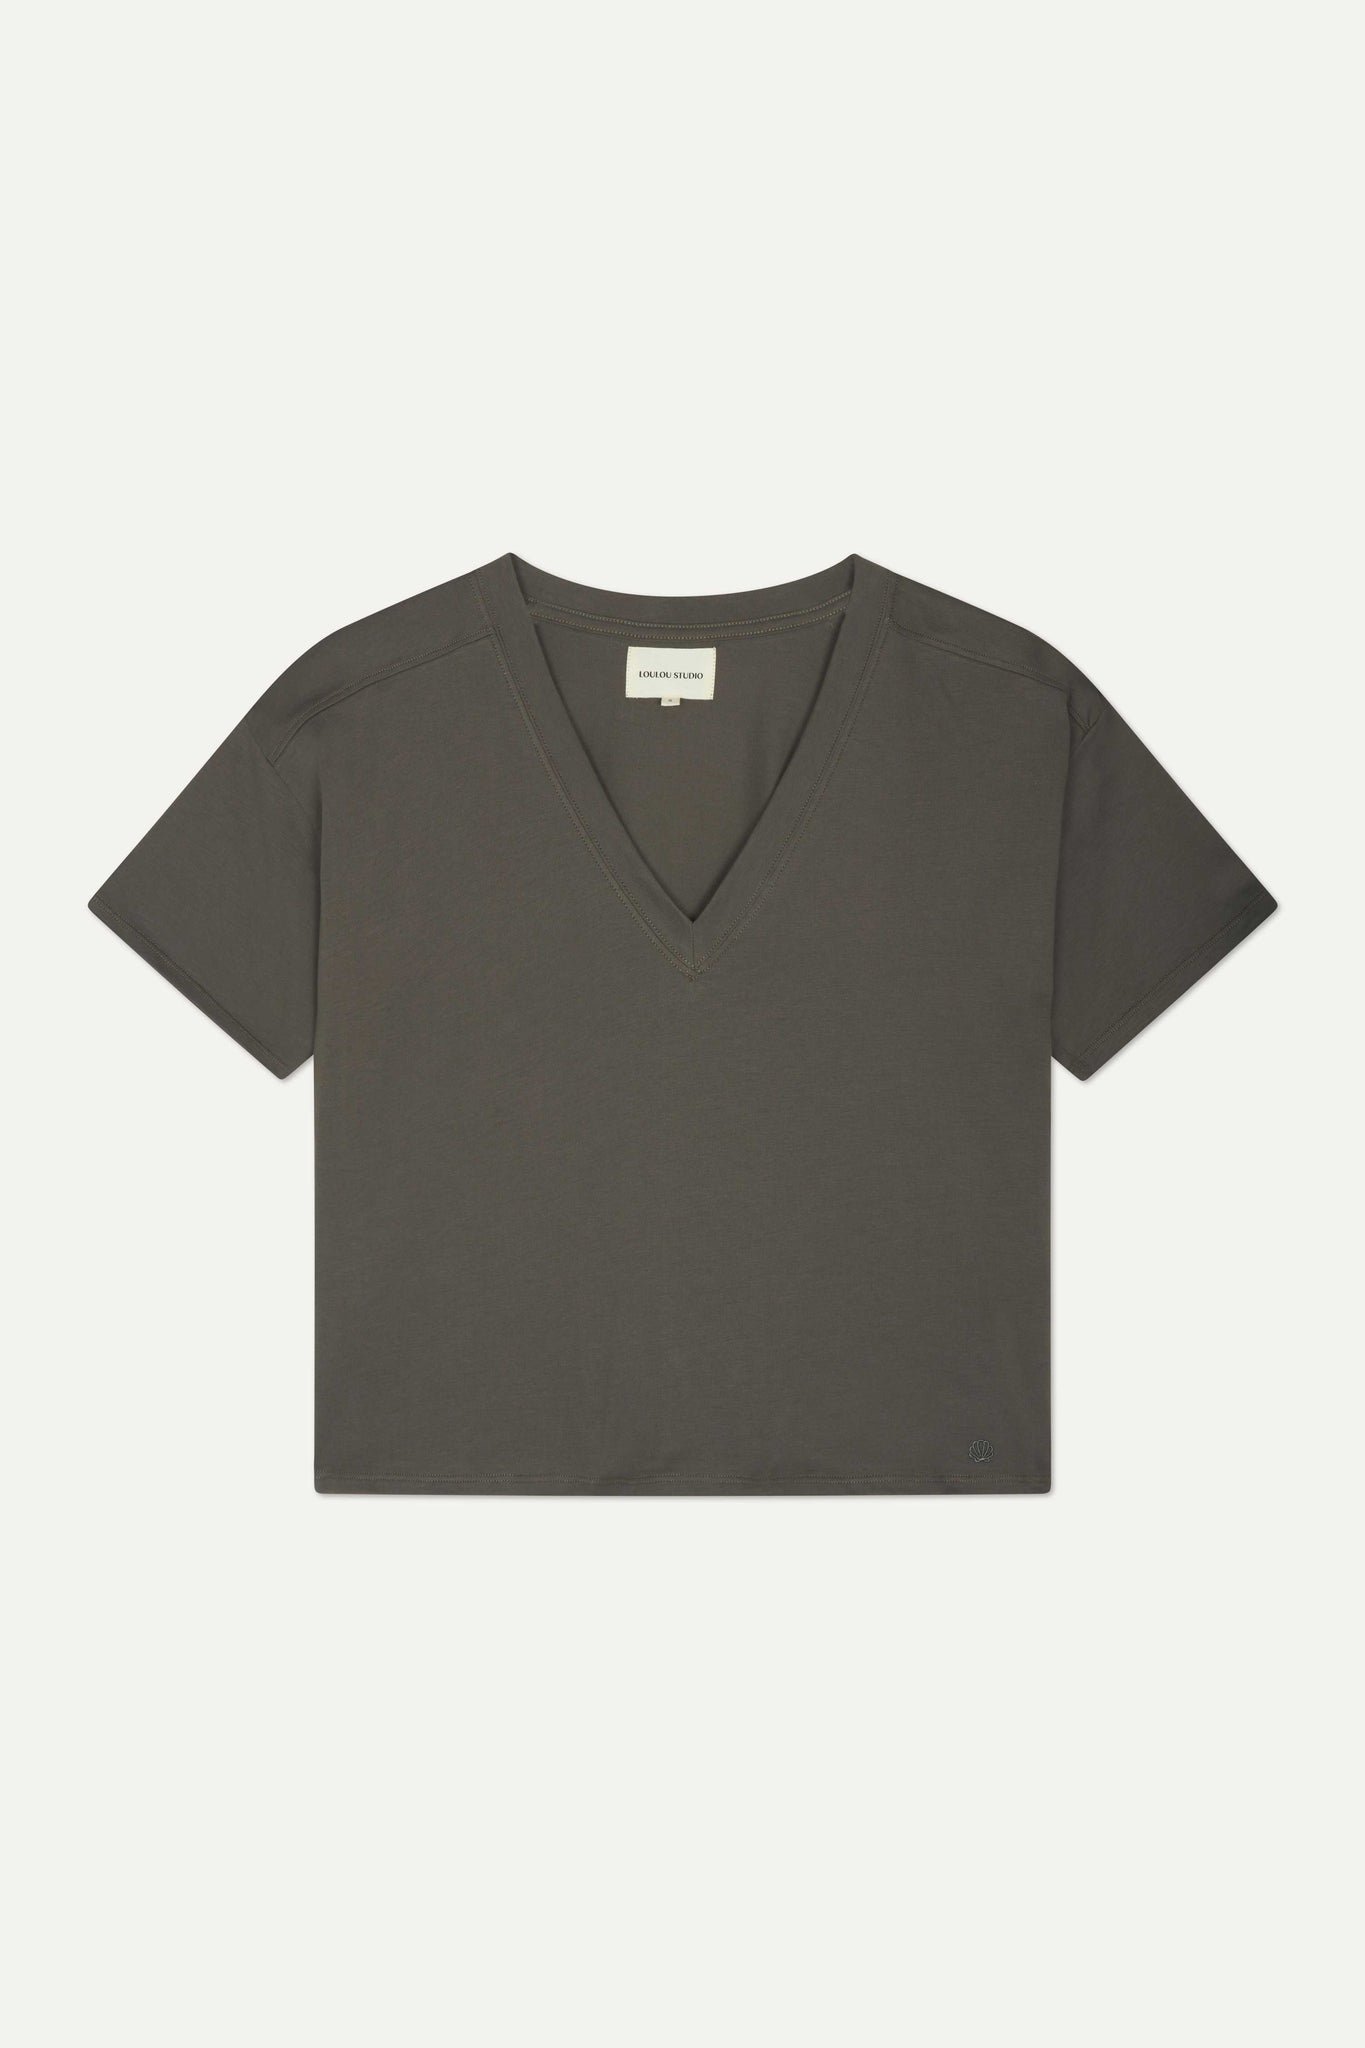 FAAA V NECK T-SHIRT BY LOULOU STUDIO IN GREY